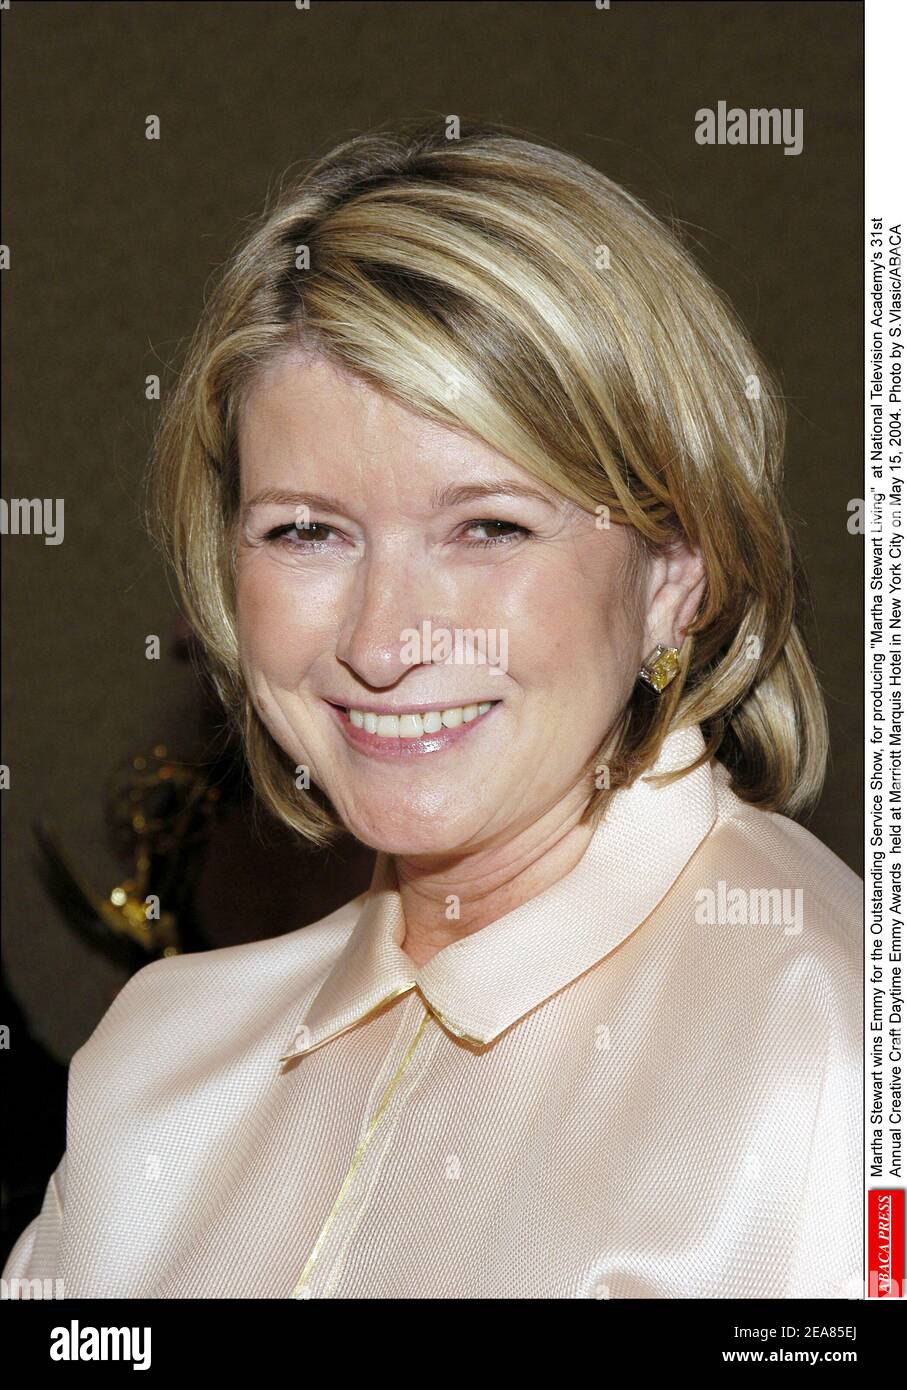 Martha Stewart wins Emmy for the Outstanding Service Show, for producing Martha Stewart Living at National Television Academy's 31st Annual Creative Craft Daytime Emmy Awards held at Marriott Marquis Hotel in New York City on May 15, 2004. Photo by S.Vlasic/ABACA Stock Photo